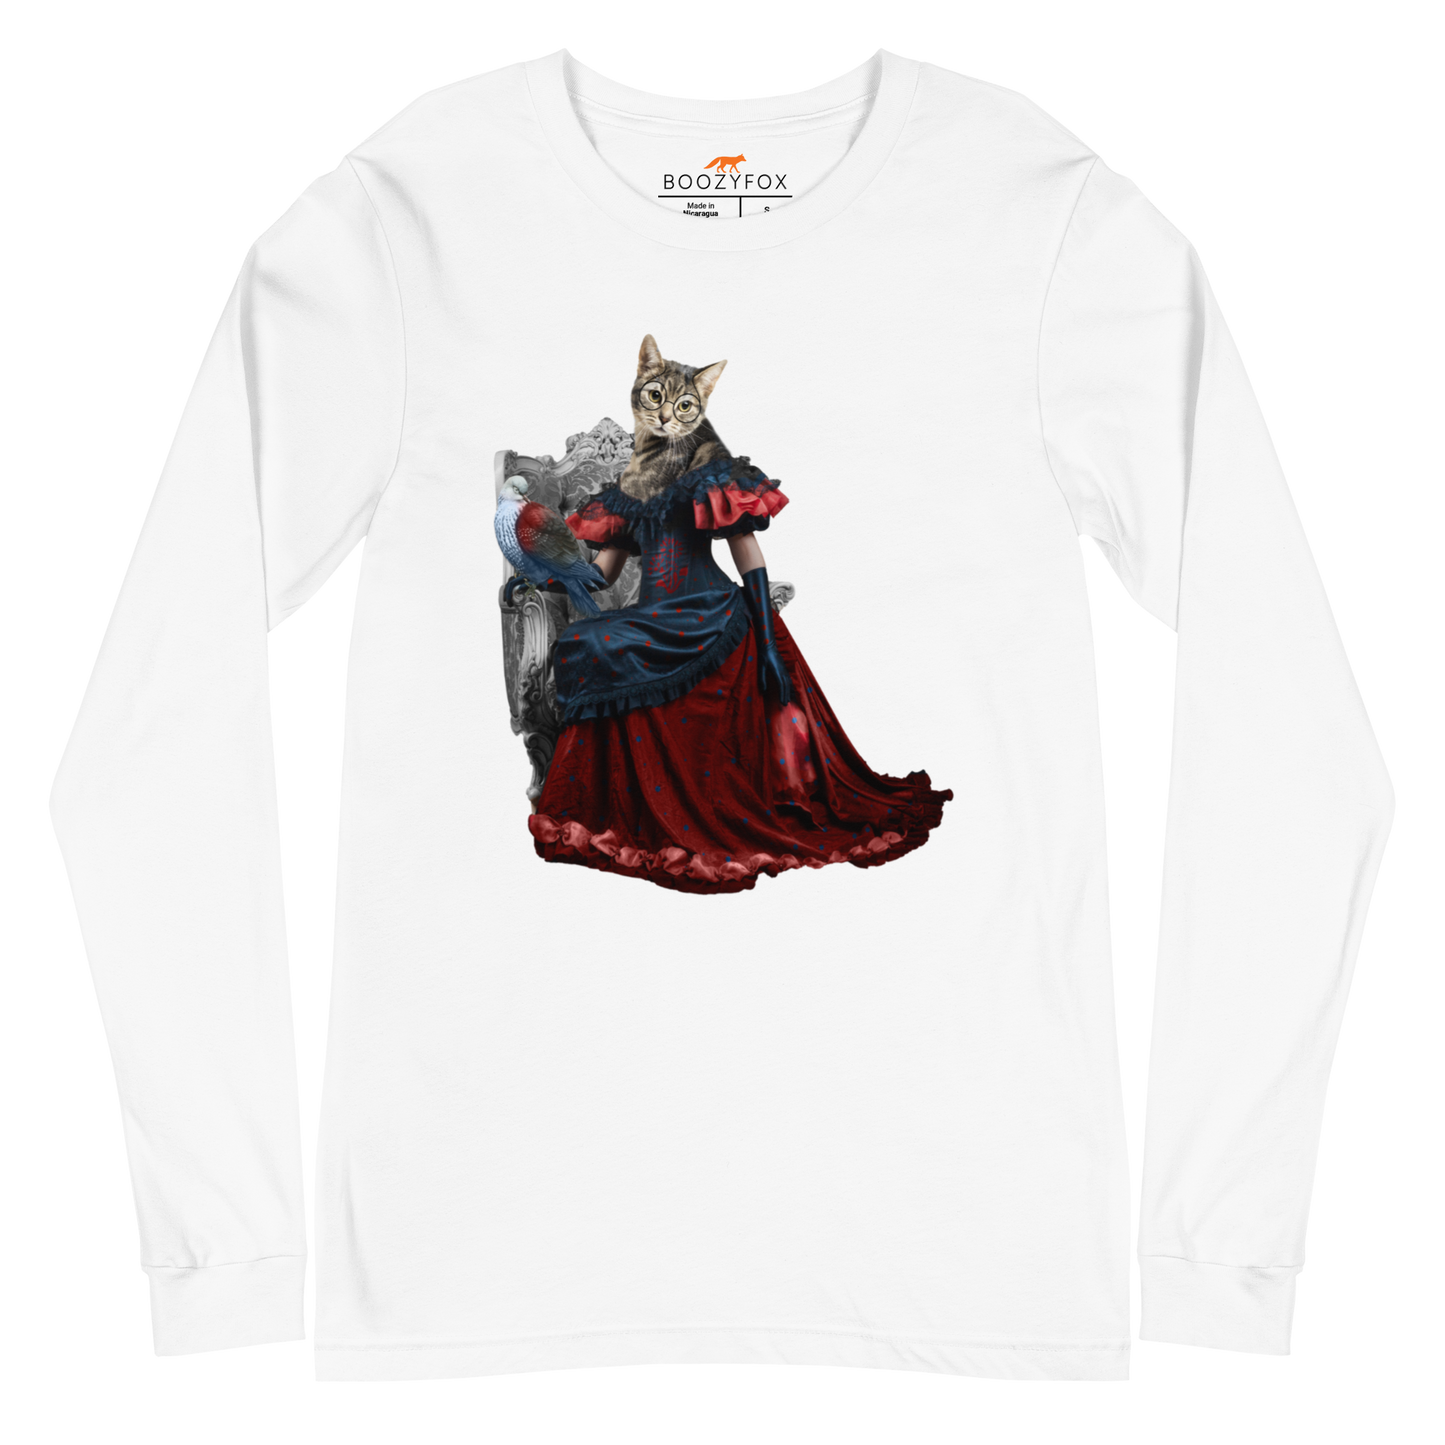 White Cat Long Sleeve Tee featuring an Anthropomorphic Cat graphic on the chest - Funny Cat Long Sleeve Graphic Tees - Boozy Fox